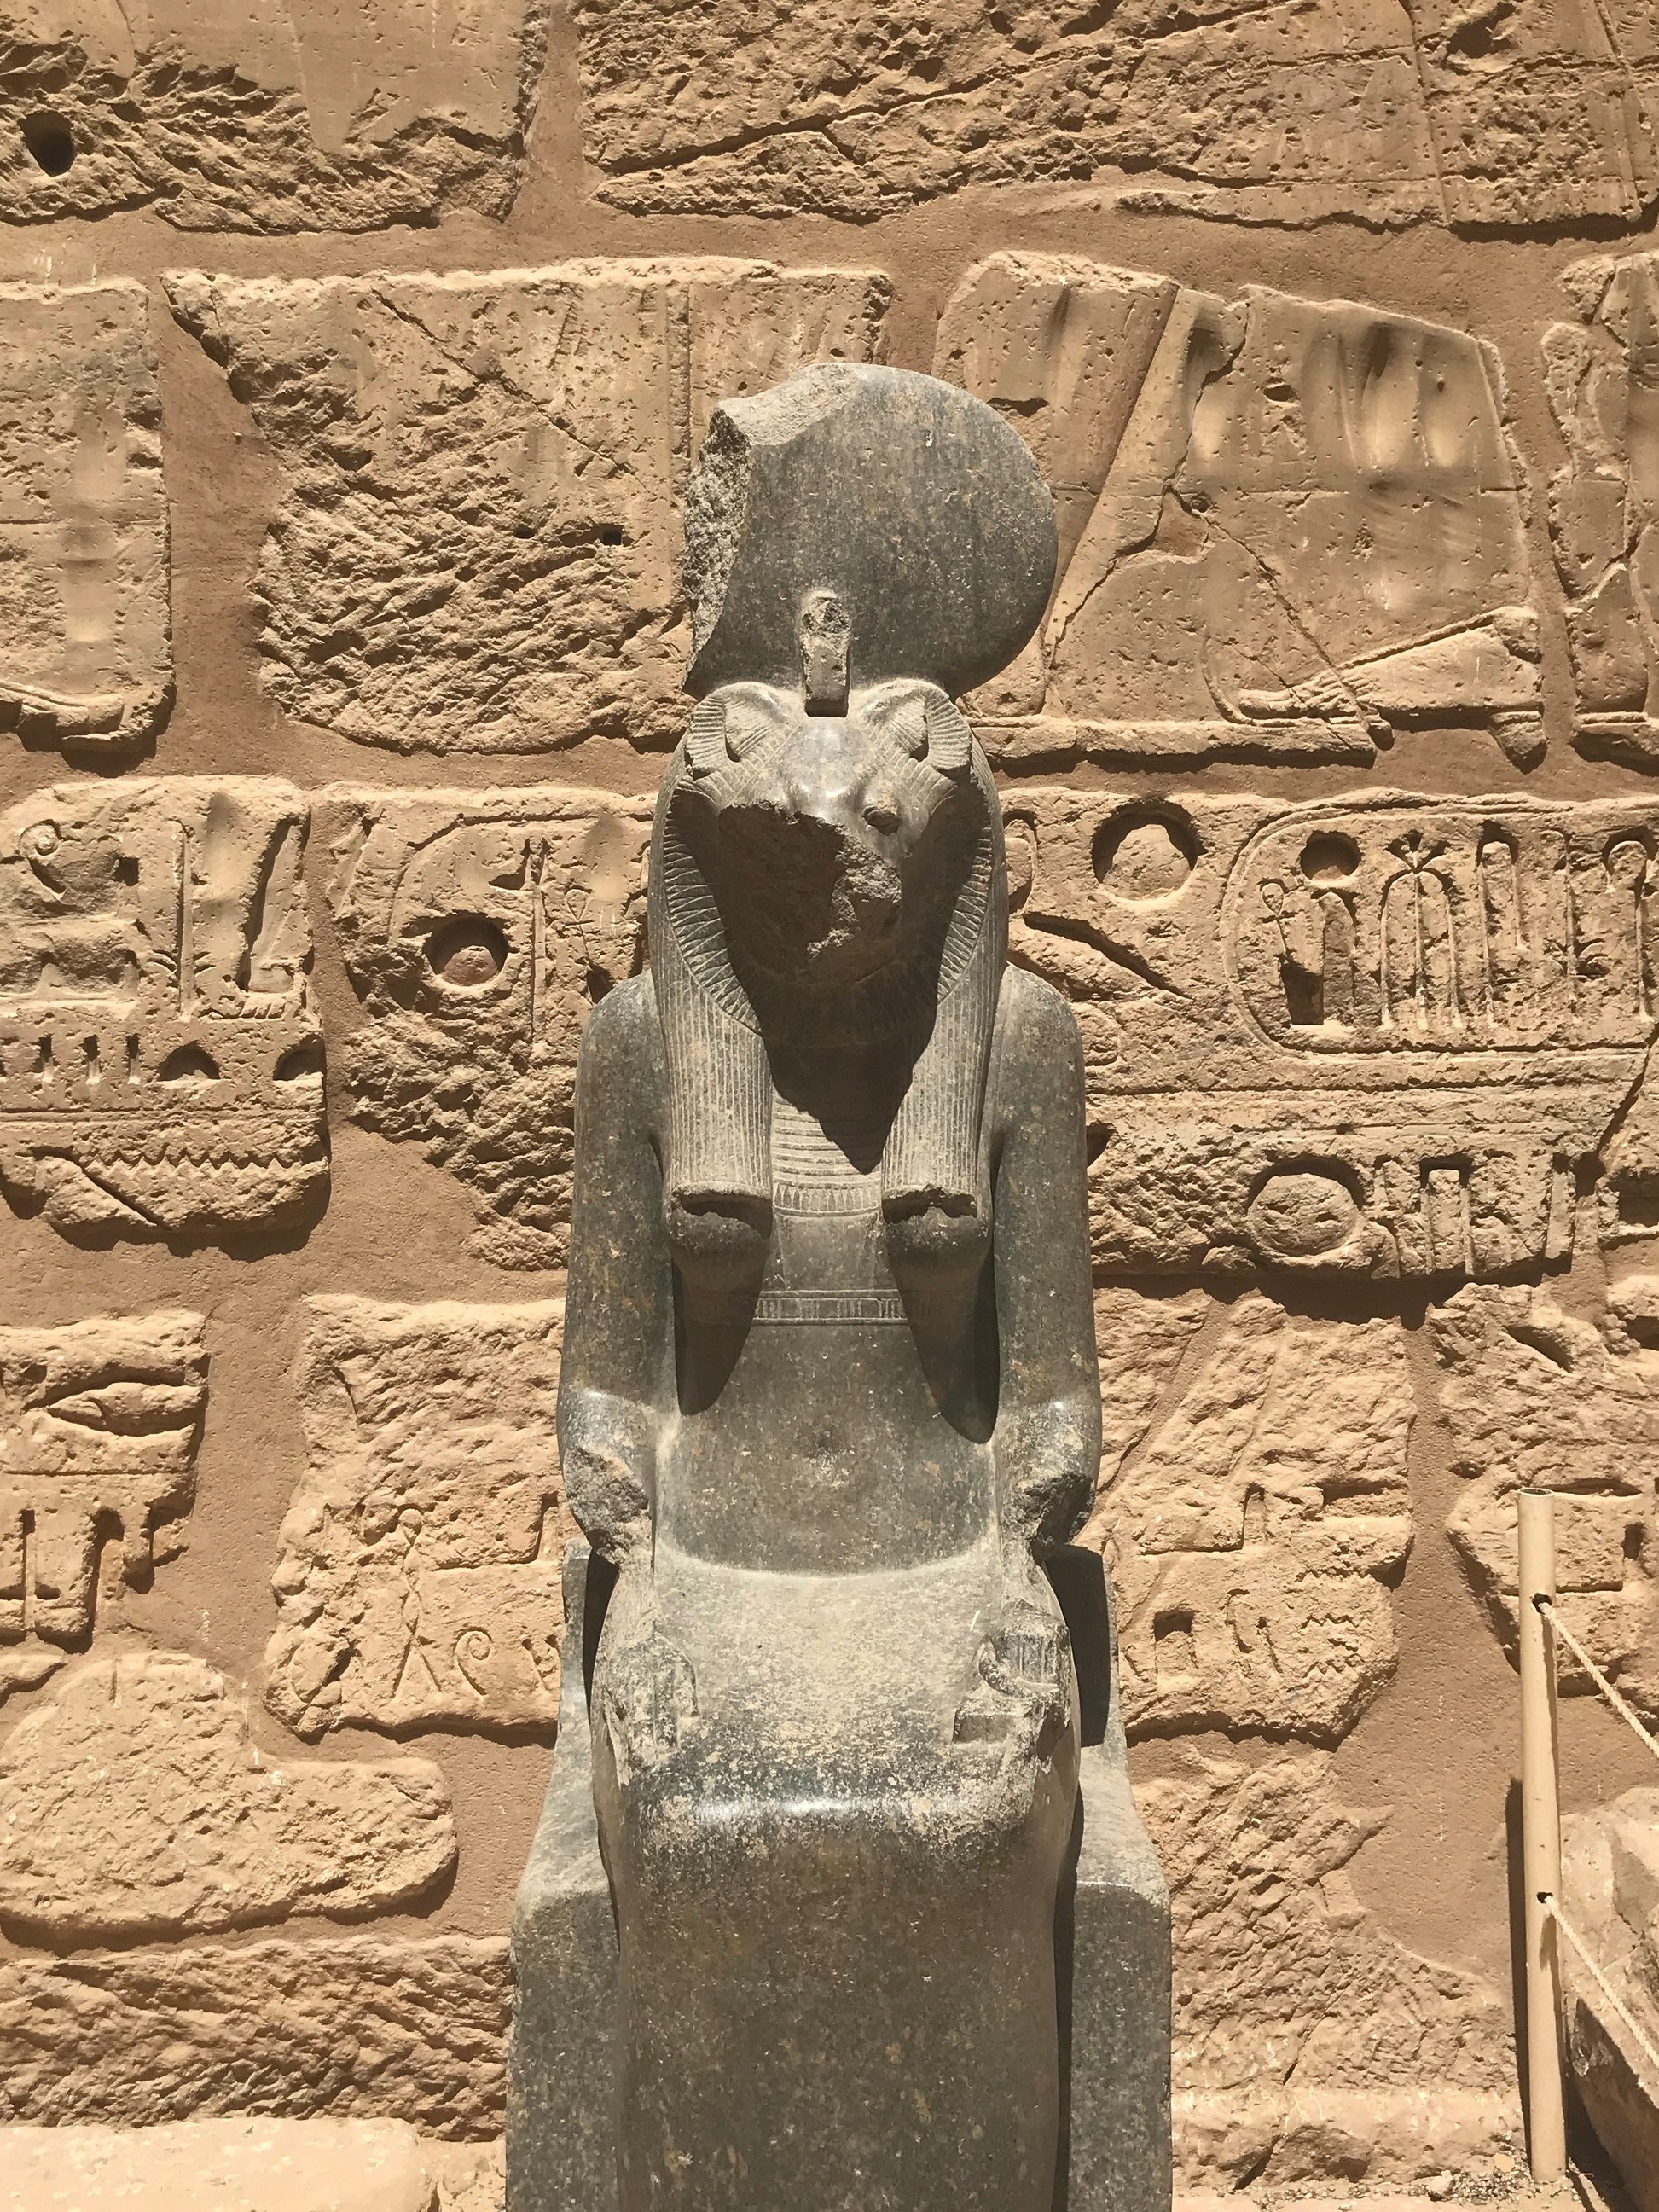 Upon entry, there are decaying statues of Sekhmet, the lioness-headed goddess of war